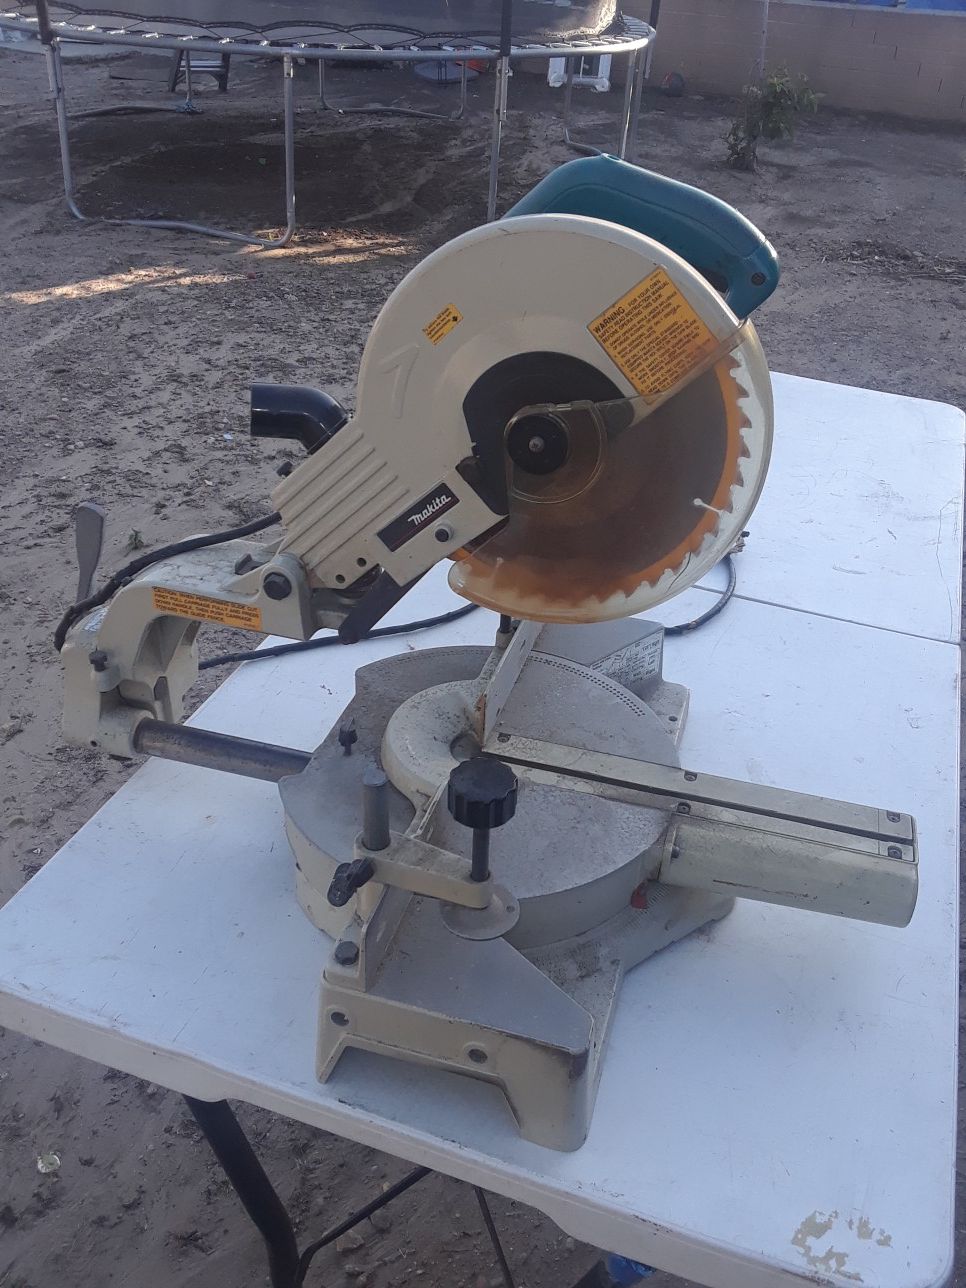 Makita miter saw. Old but working perfectly.